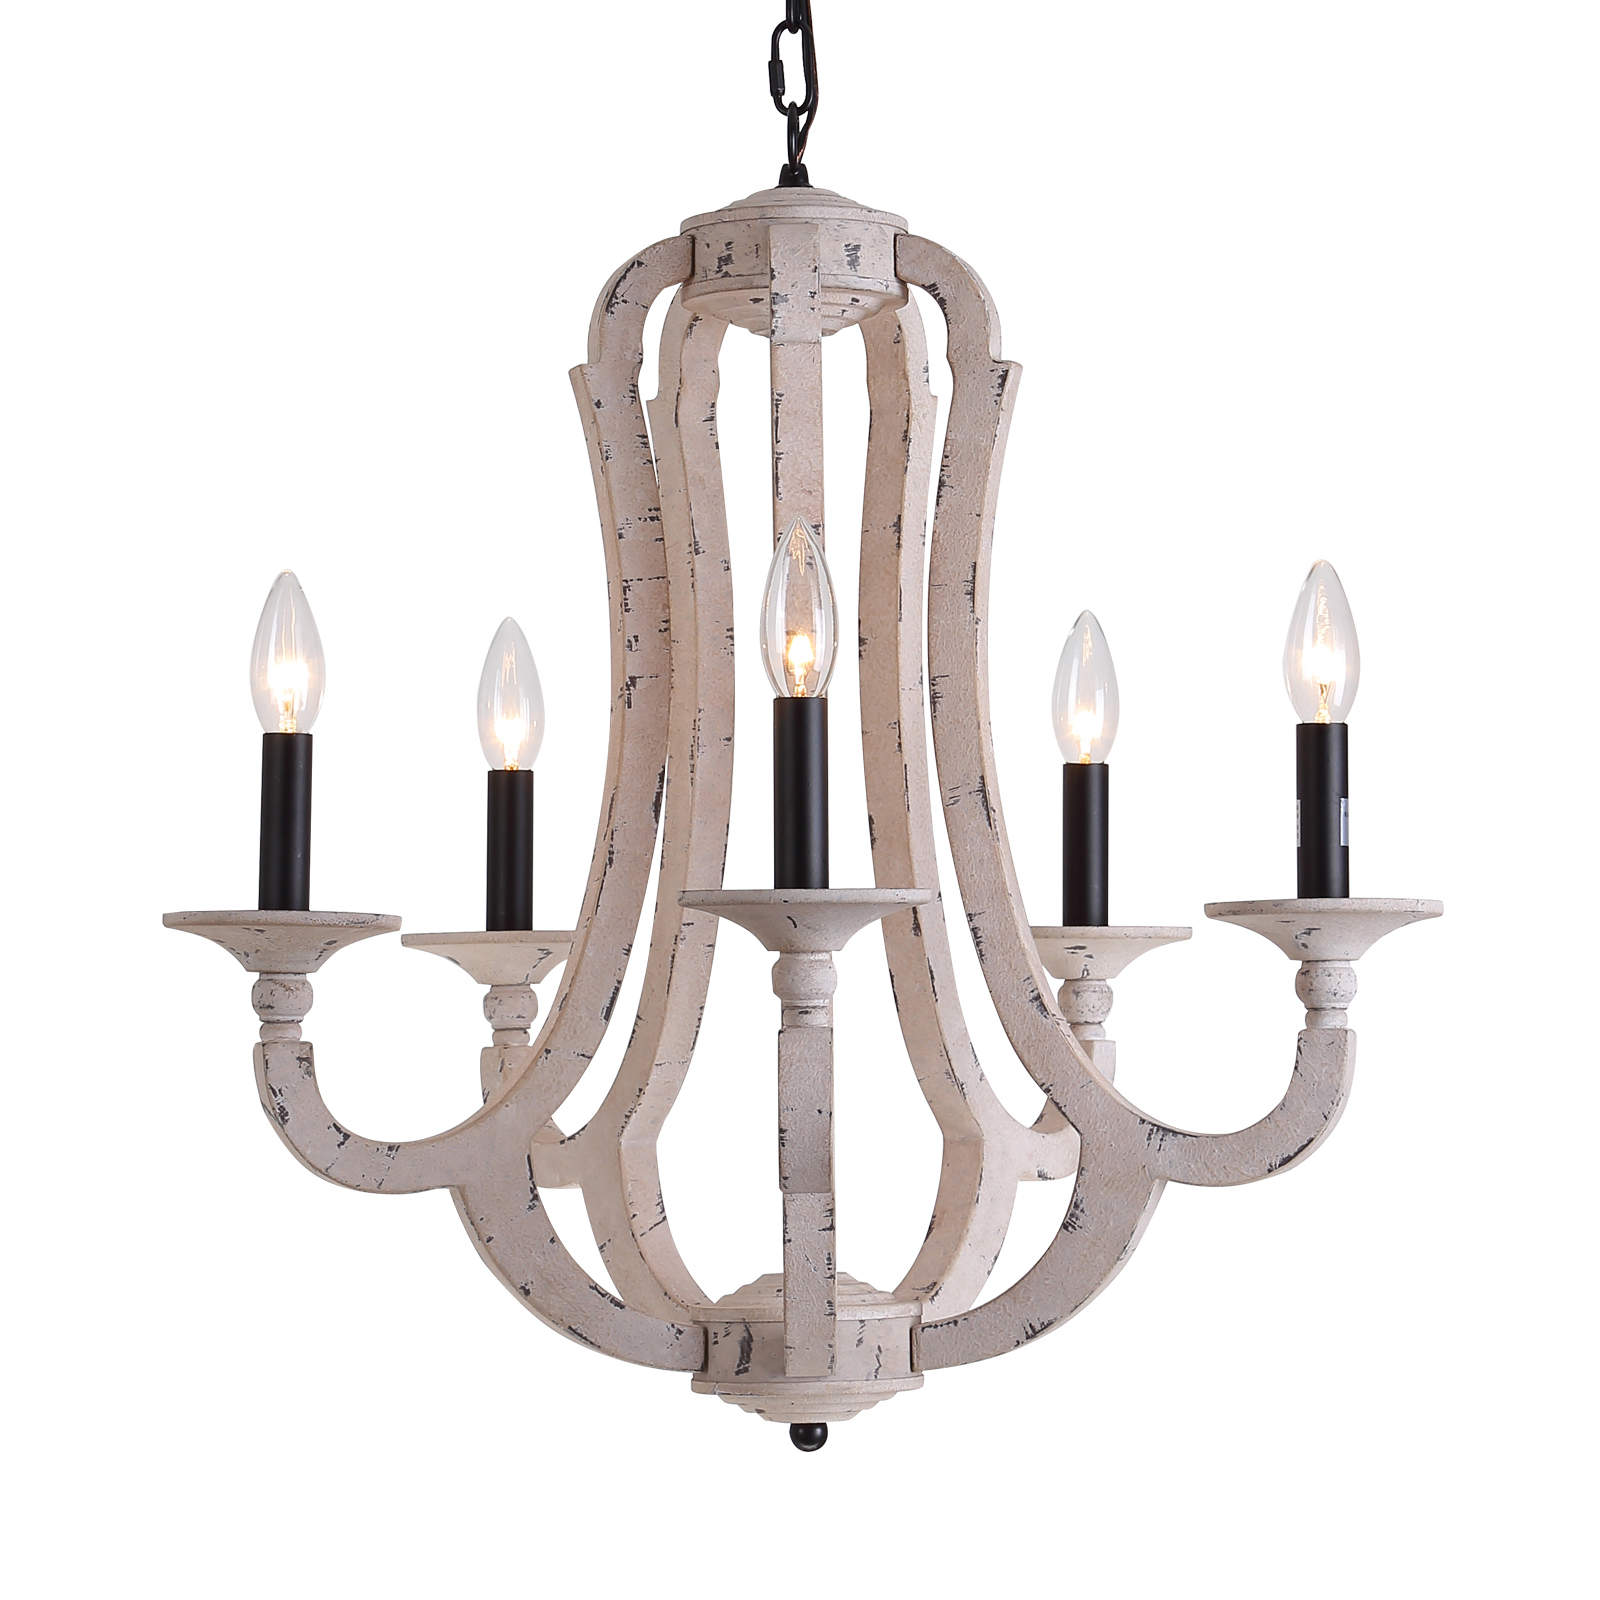 5-Light 300W 110V Rustic Wrought Iron Chandeliers, Vintage Style Candle Chandeliers, 22.5 inch Wide Farmhouse Pendant Lighting, for Dining Rooms, Bedroom, Foyer, Kitchen, Distressed White and Black - image 1 of 7